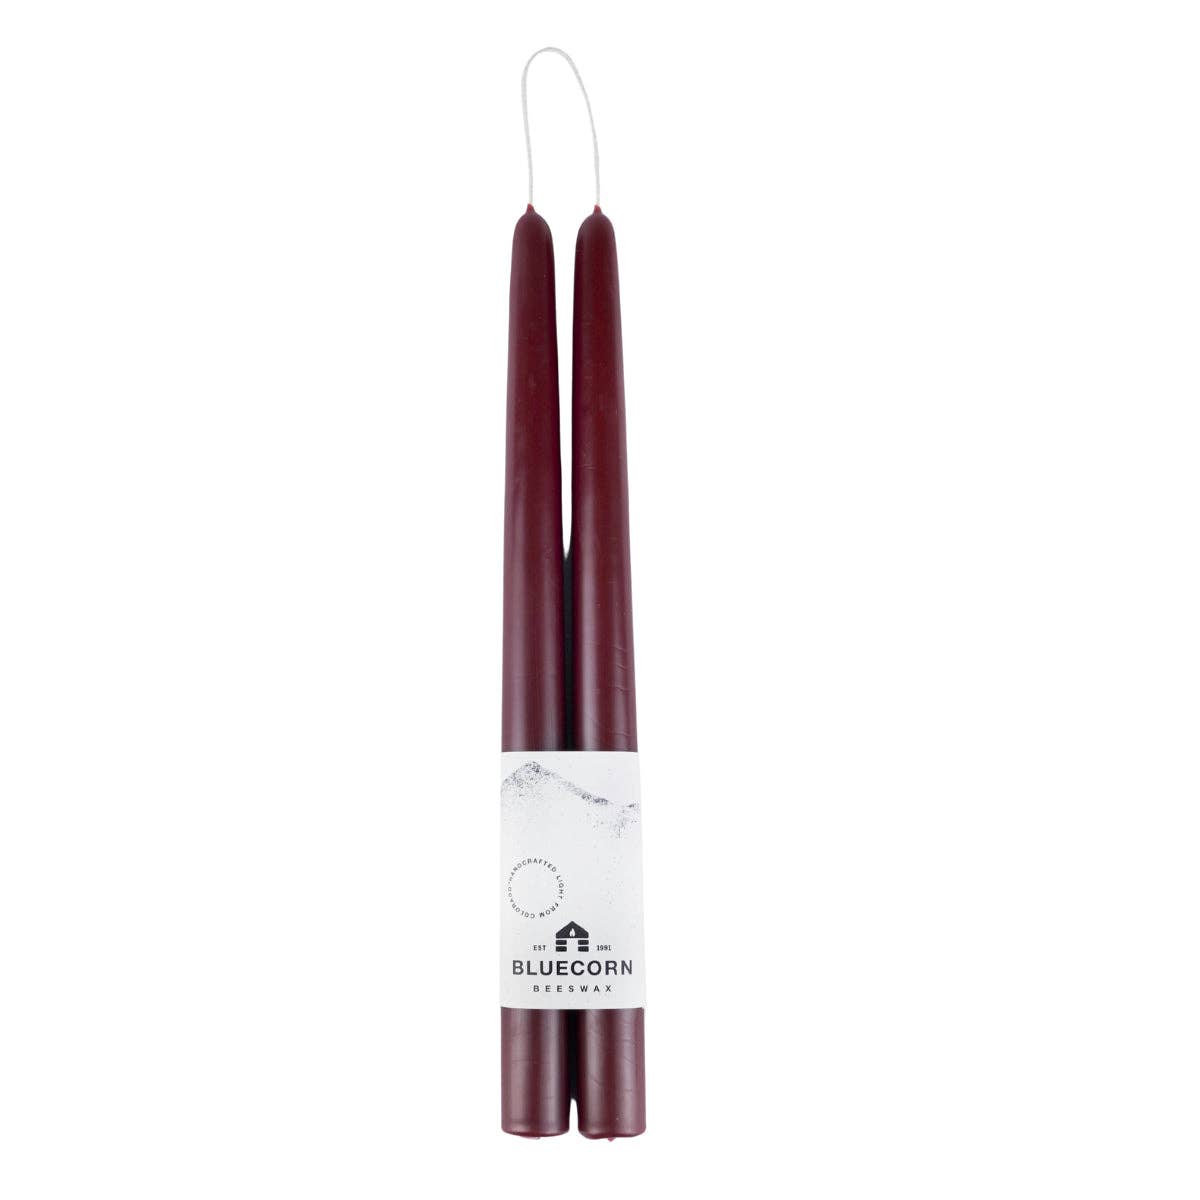 Pair of Hand-Dipped Beeswax Taper Candles - Burgundy